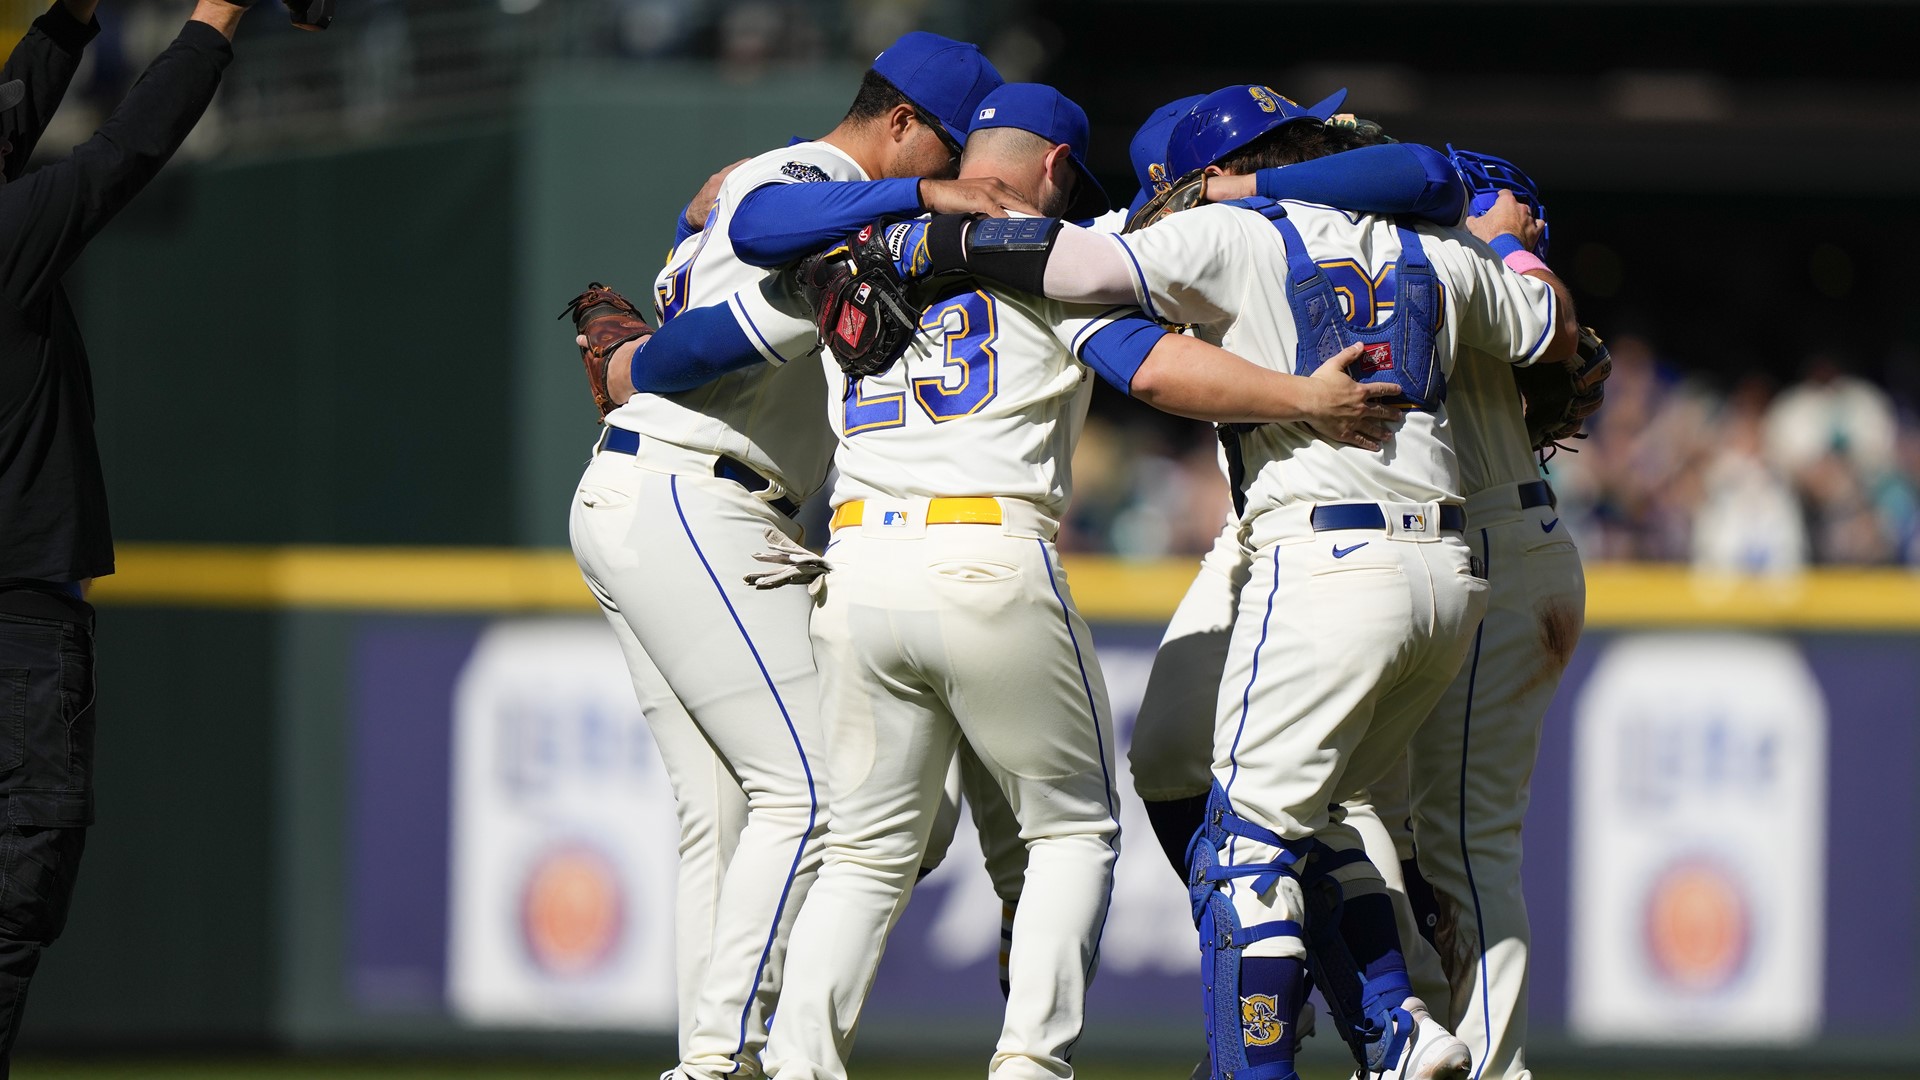 The stakes were low at Sunday's game, as the Mariners had already been eliminated. But that didn't stop tens of thousands of fans from showing up anyway.